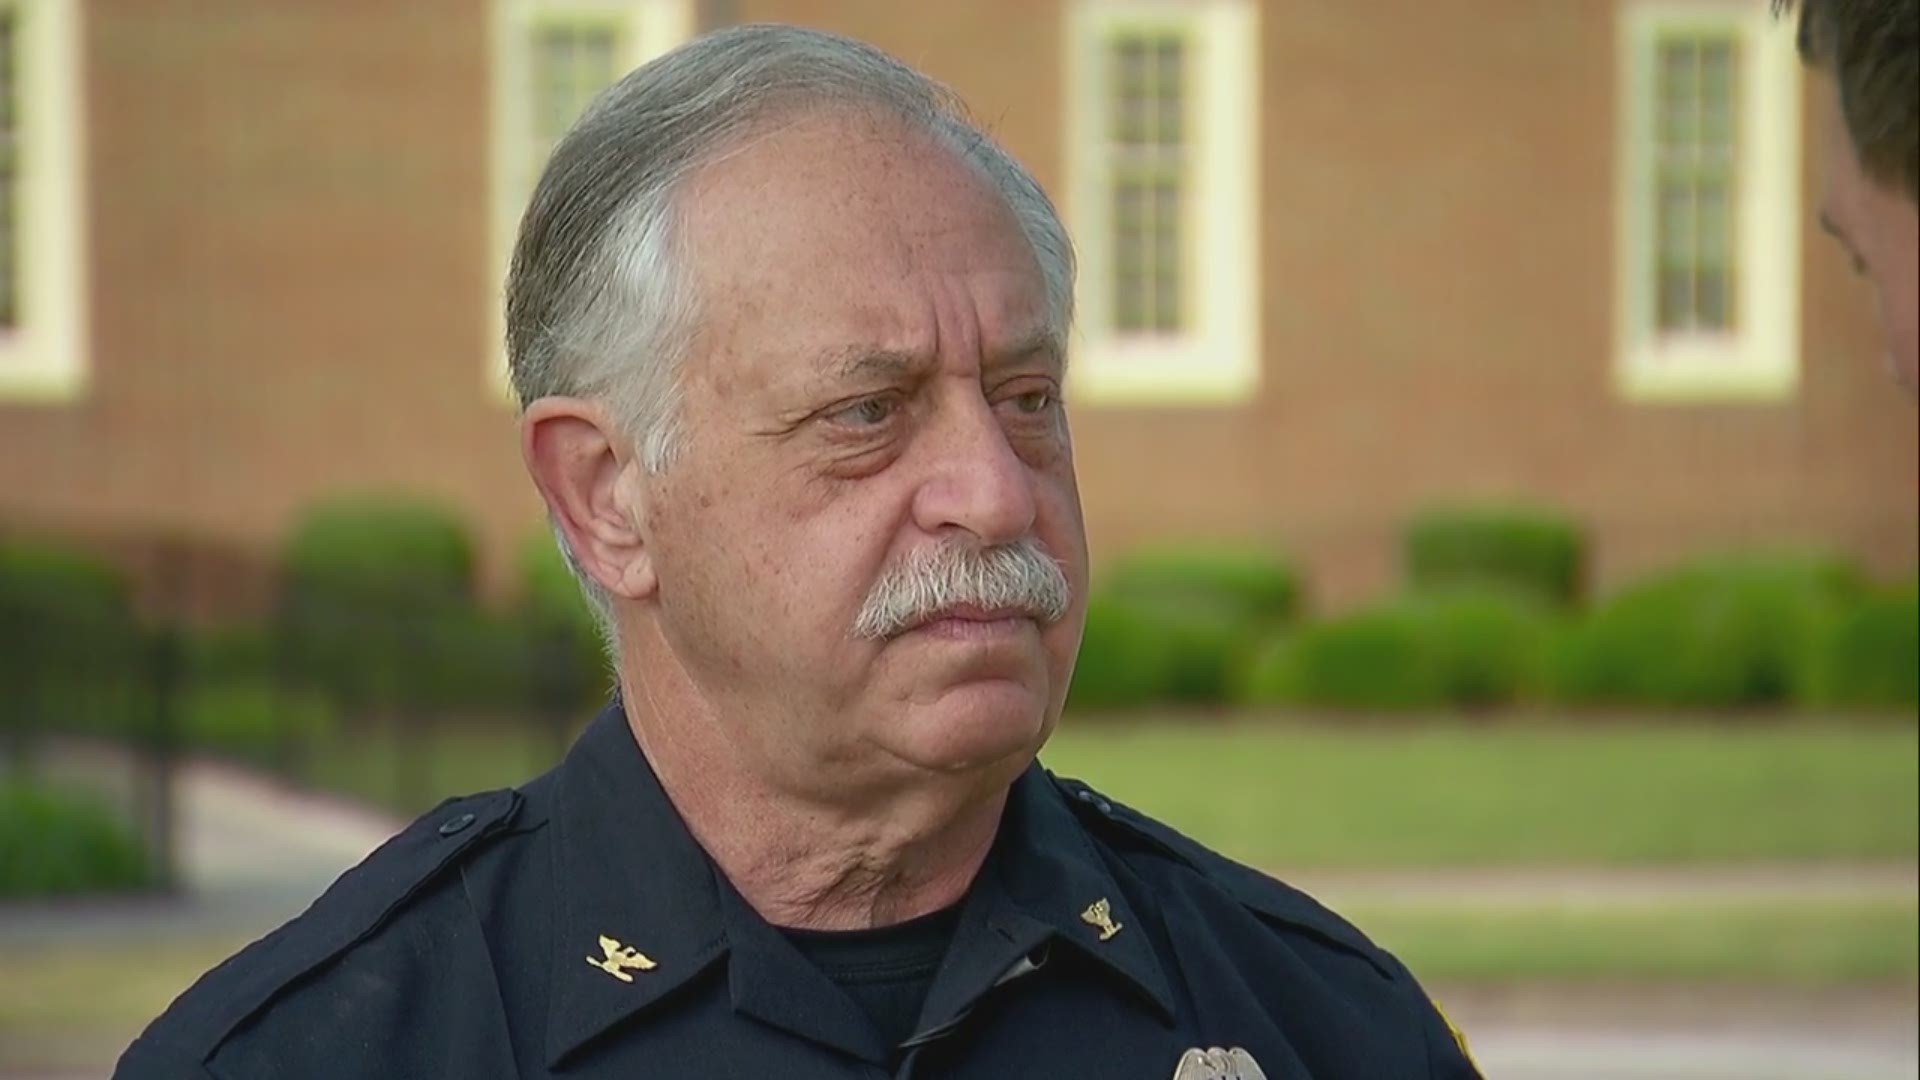 Virginia Beach Police Chief James Cervera discussed the scope of the mass shooting case and gave additional details how officers responded to the shooting.